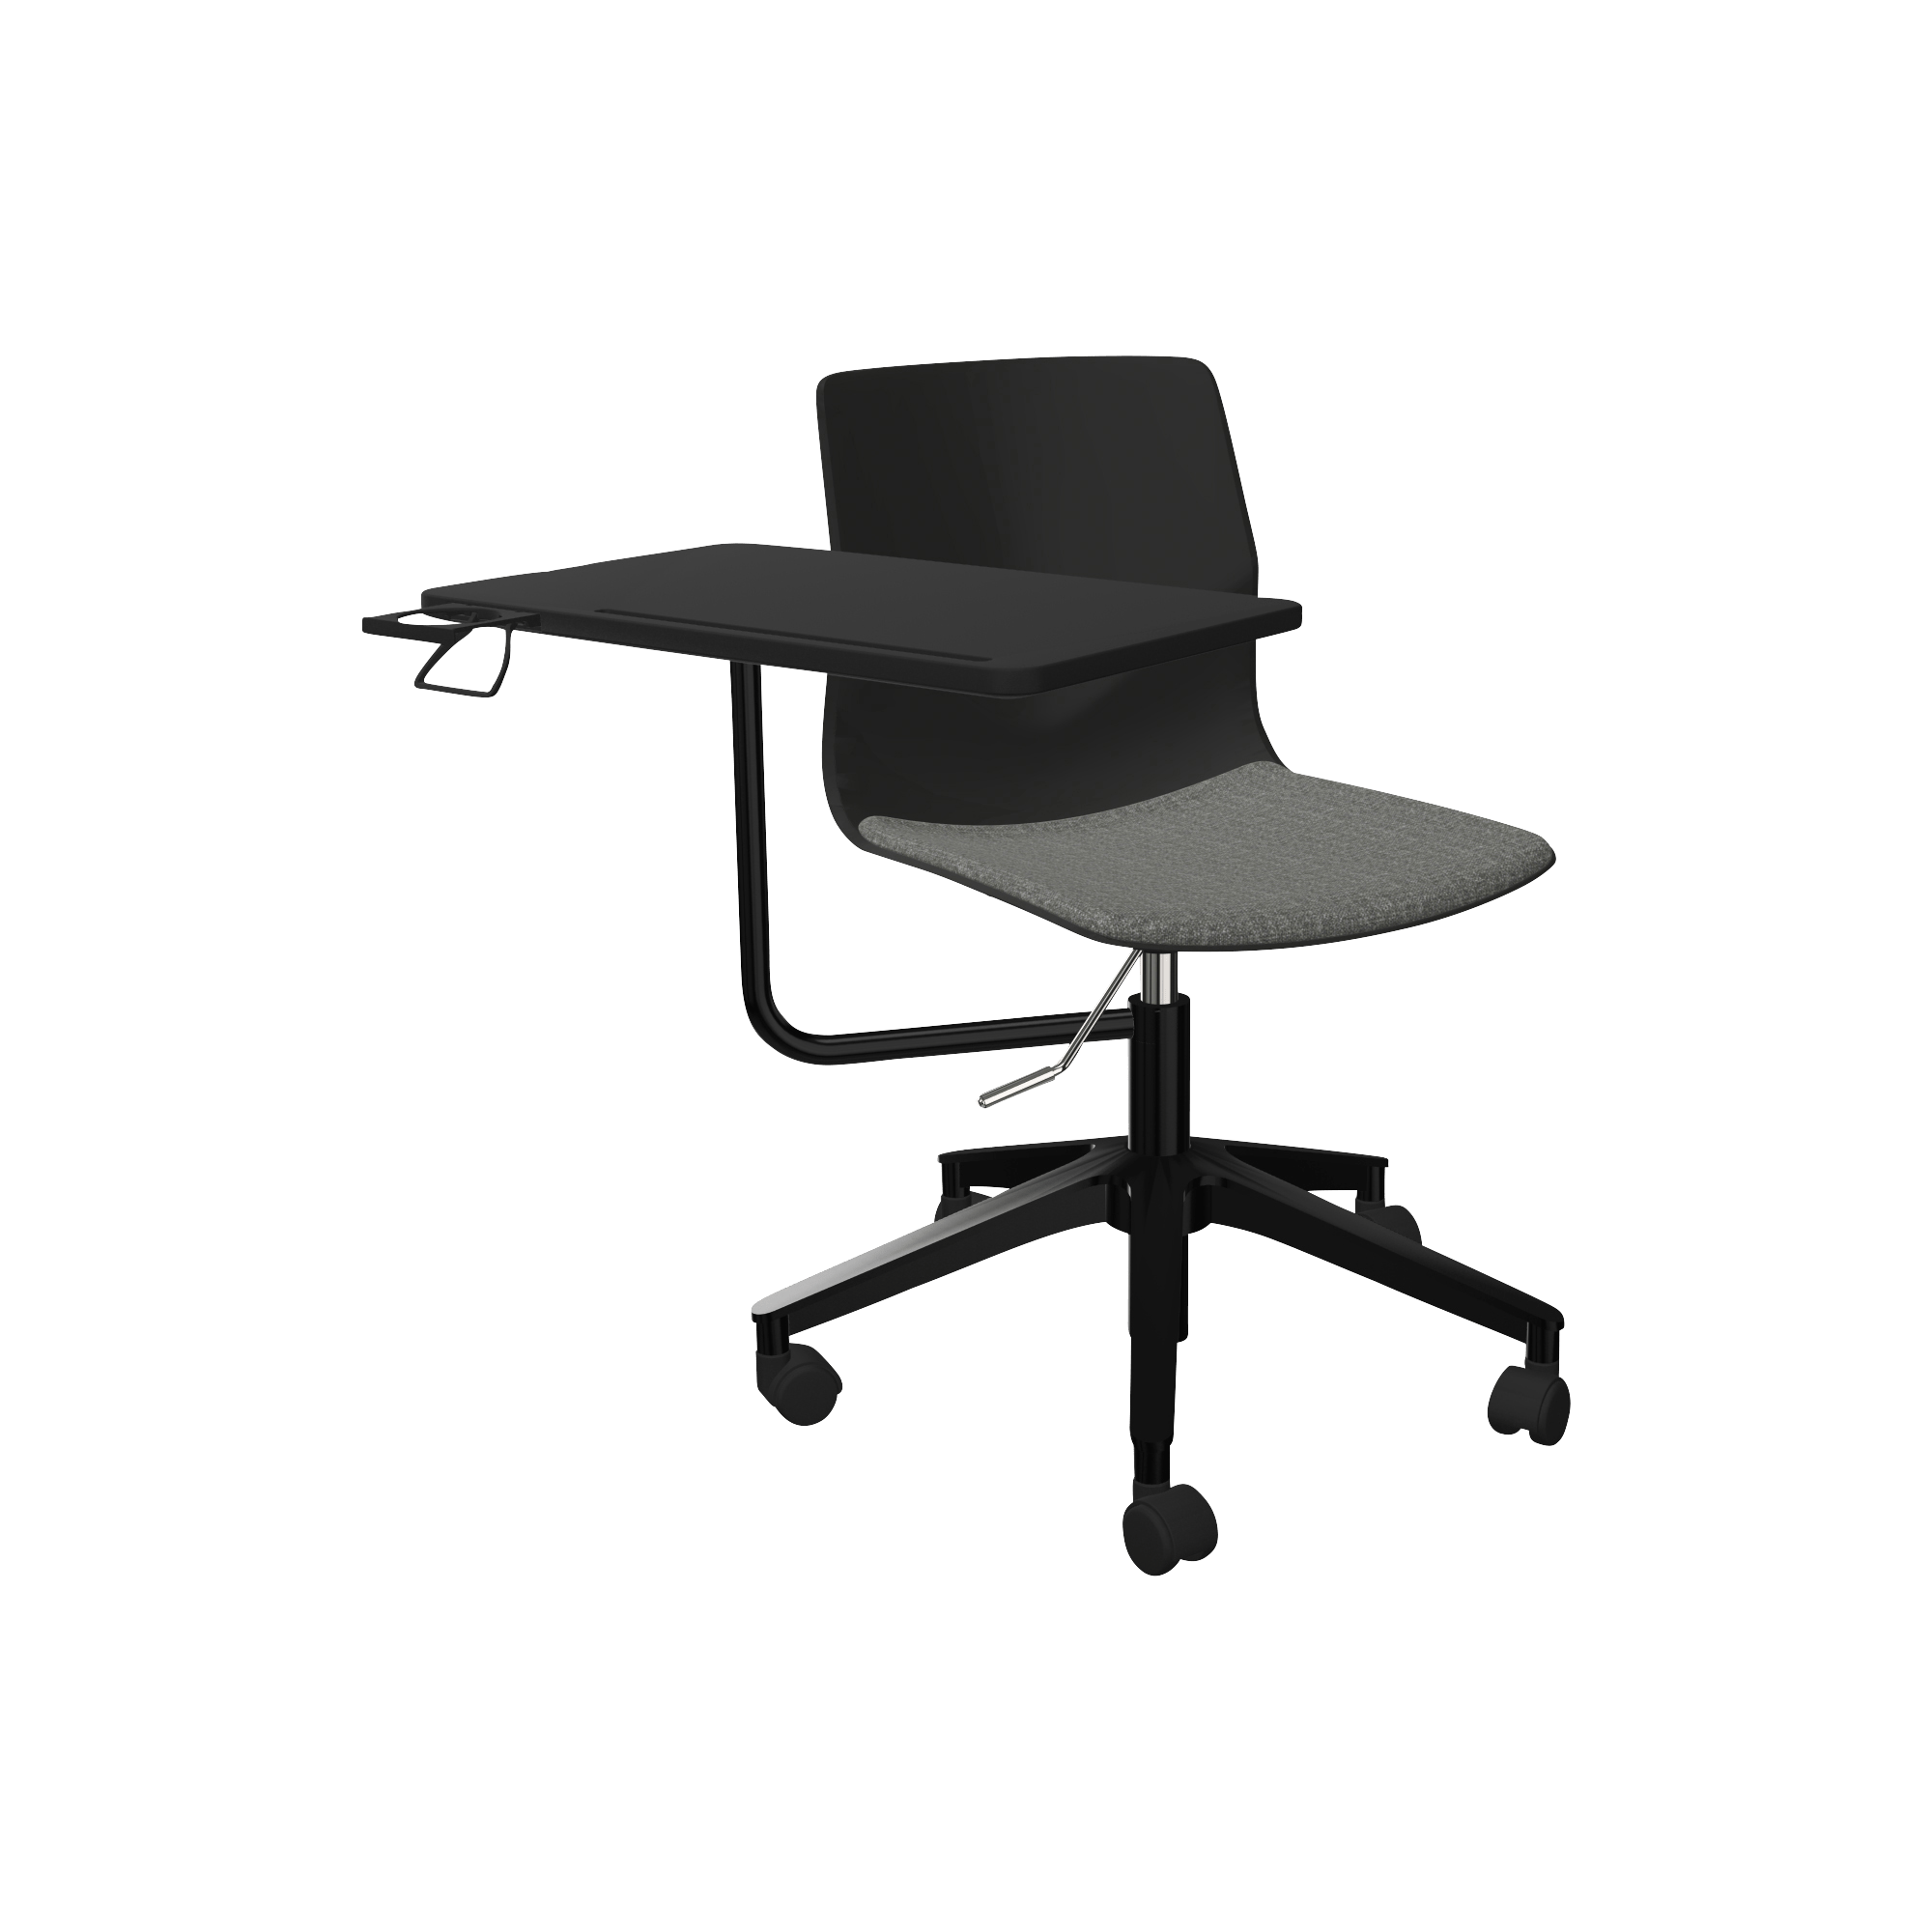 Grey and black pedestal lecture chair with white work desk attached